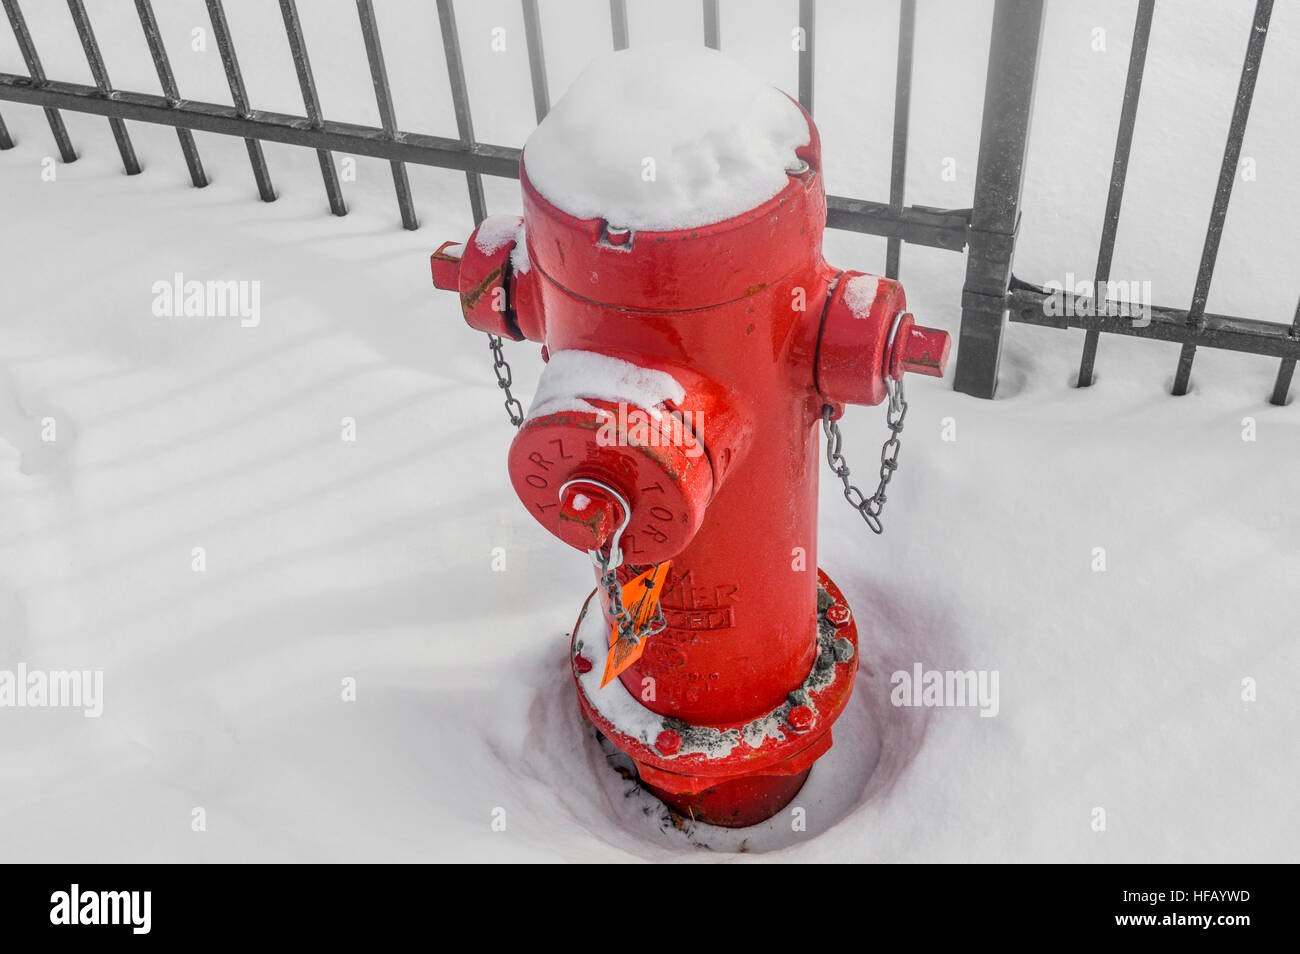 Montreal, Canada - December 29, 2016. Red fire hydrant sunk in the snow. Stock Photo